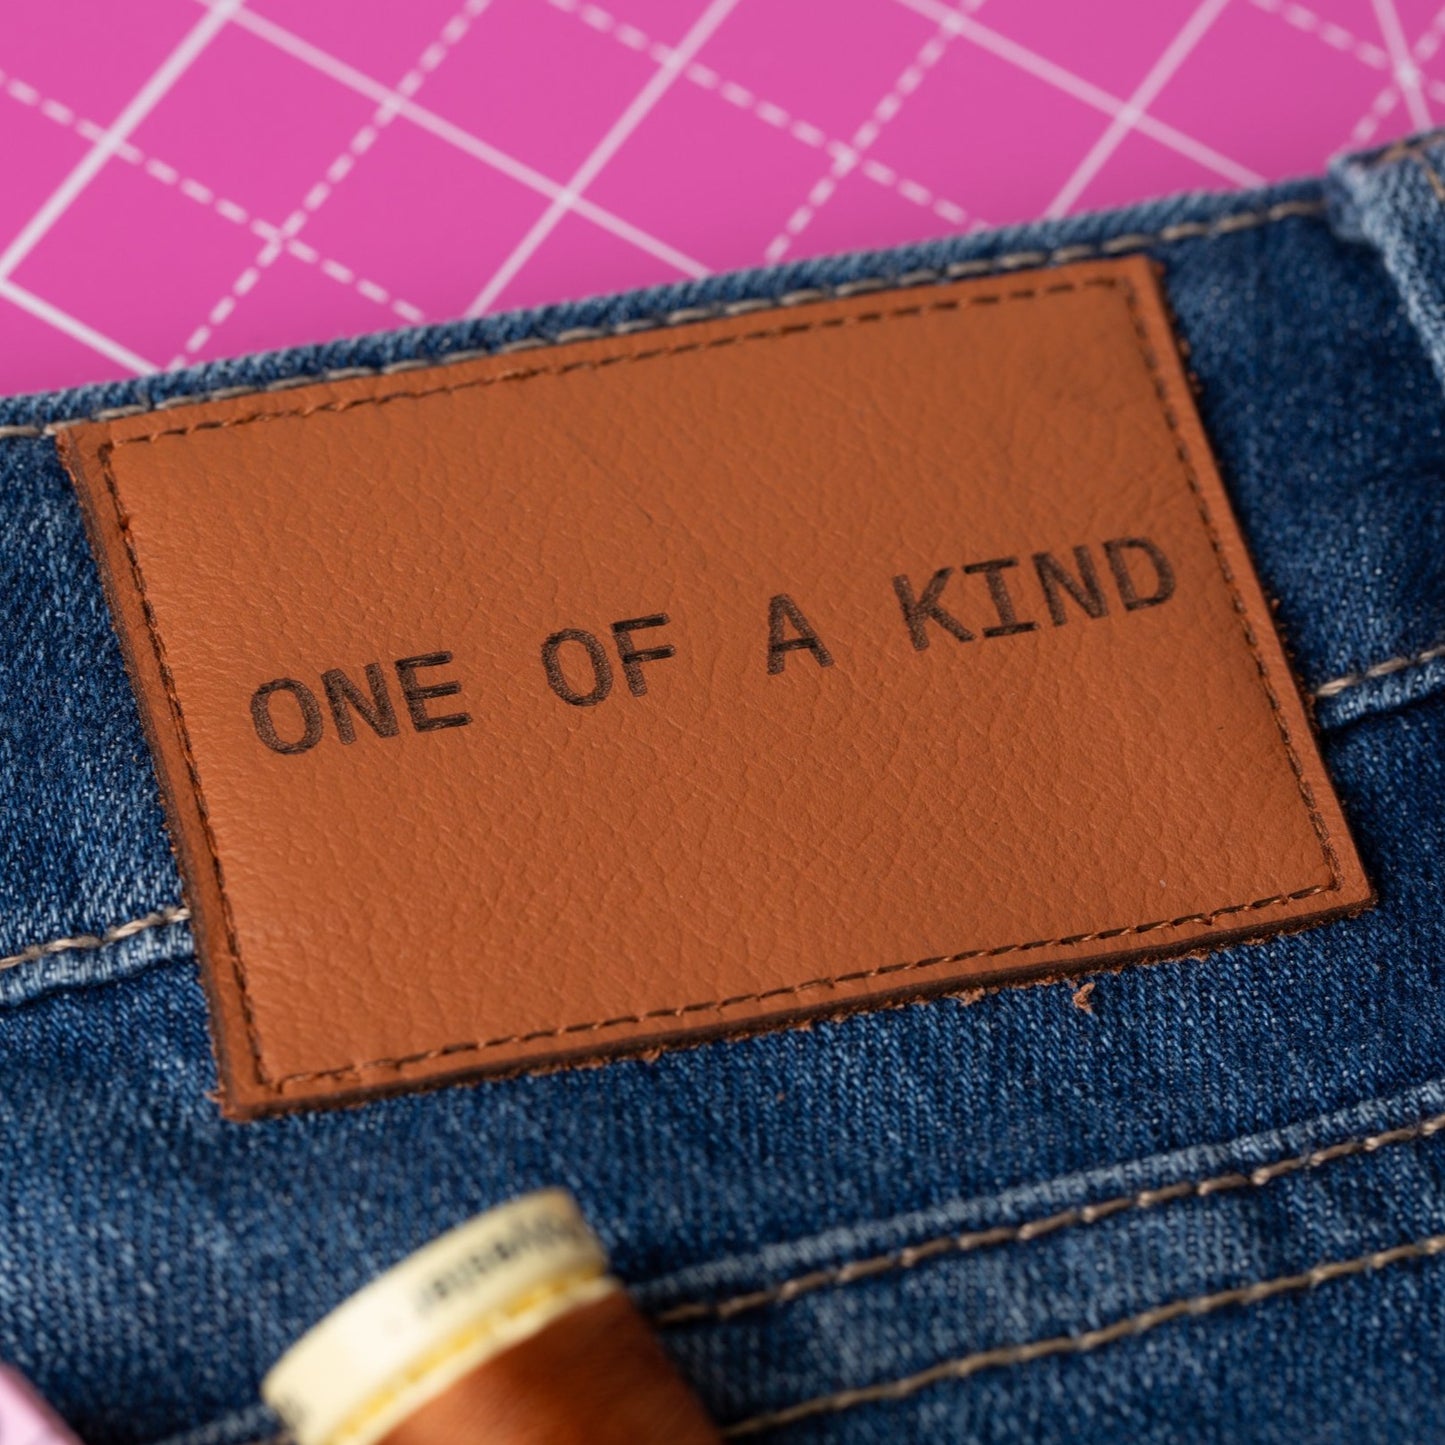 ONE OF A KIND Pack of 2 Leather Jeans Labels - Whisky Tan